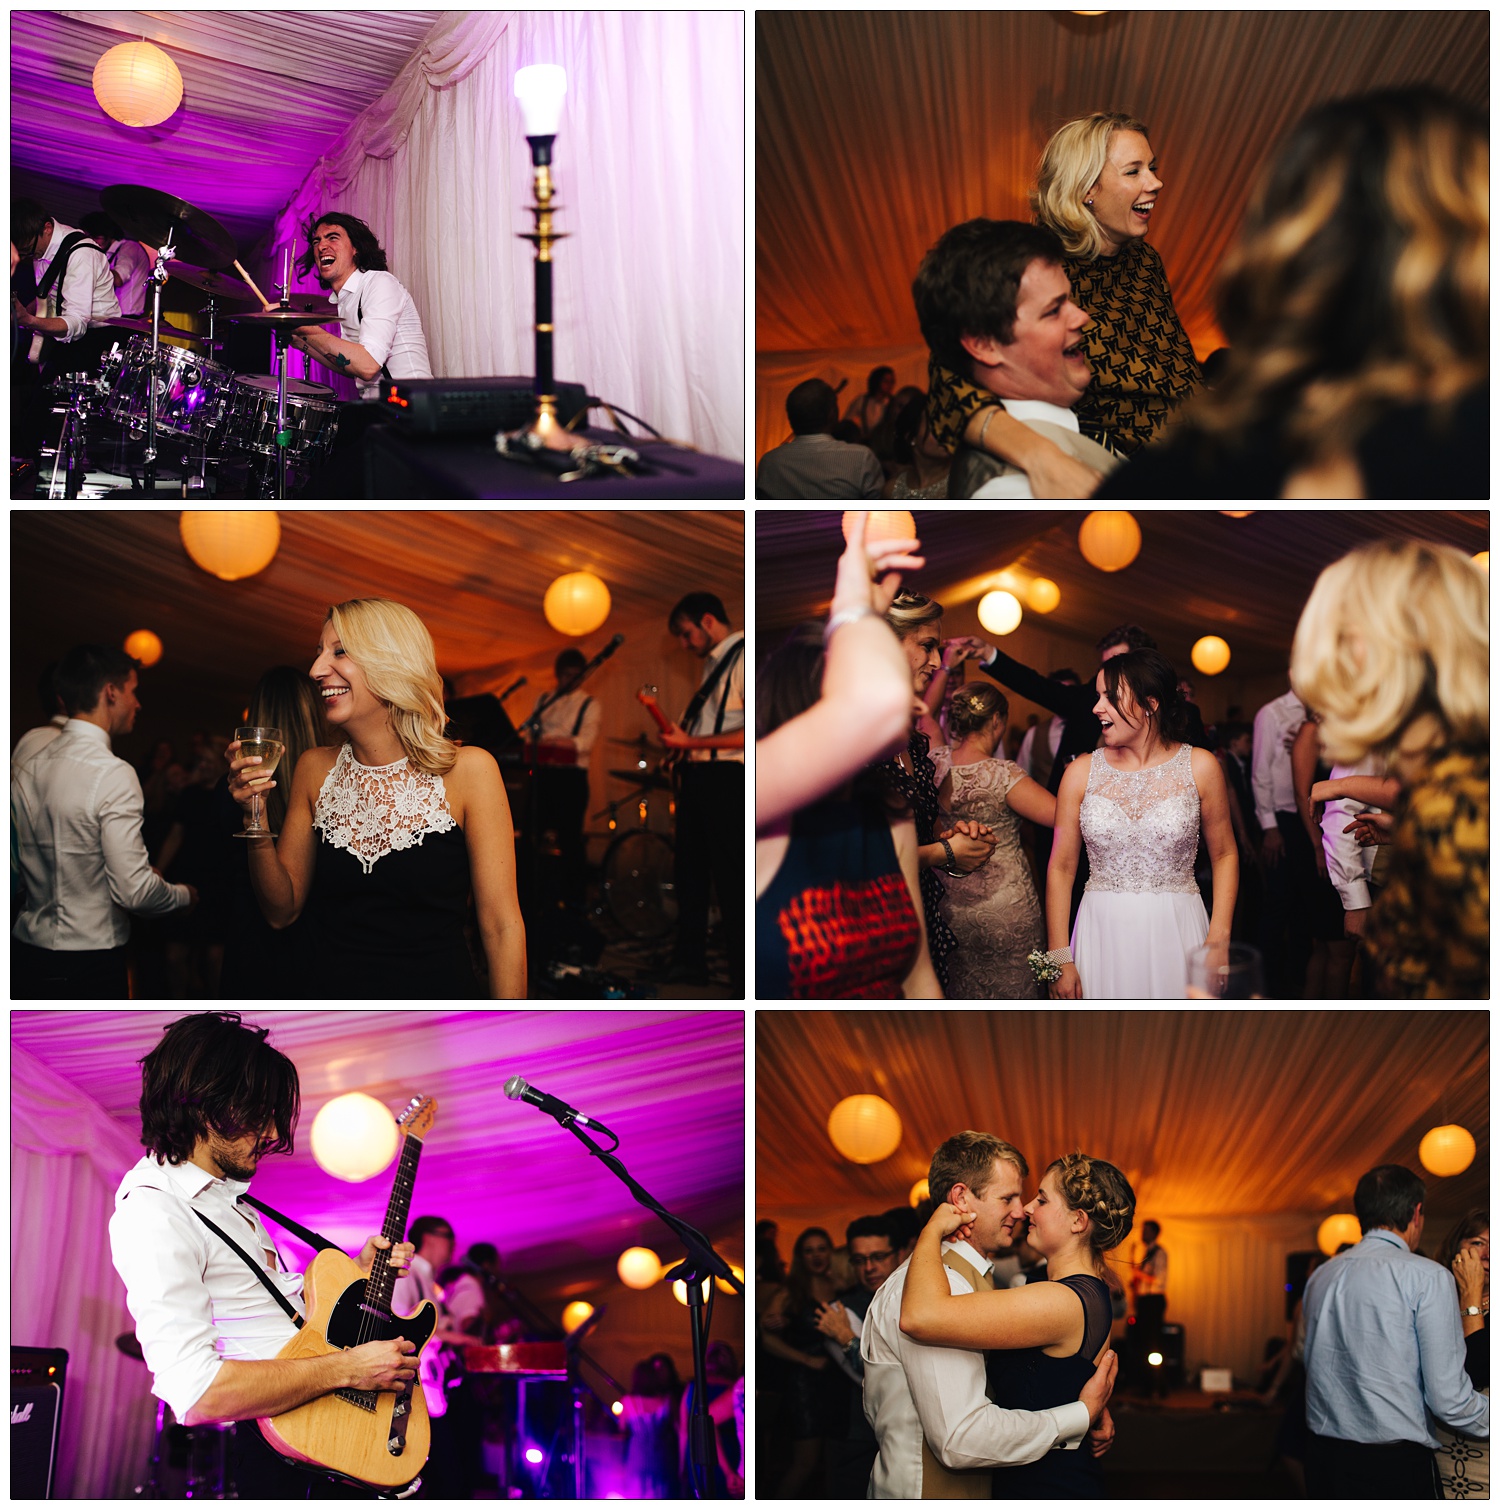 Colourful pictures in a marquee for a wedding reception. Orange and purple lighting. A drummer and guitarist are playing, a couple are dancing together.